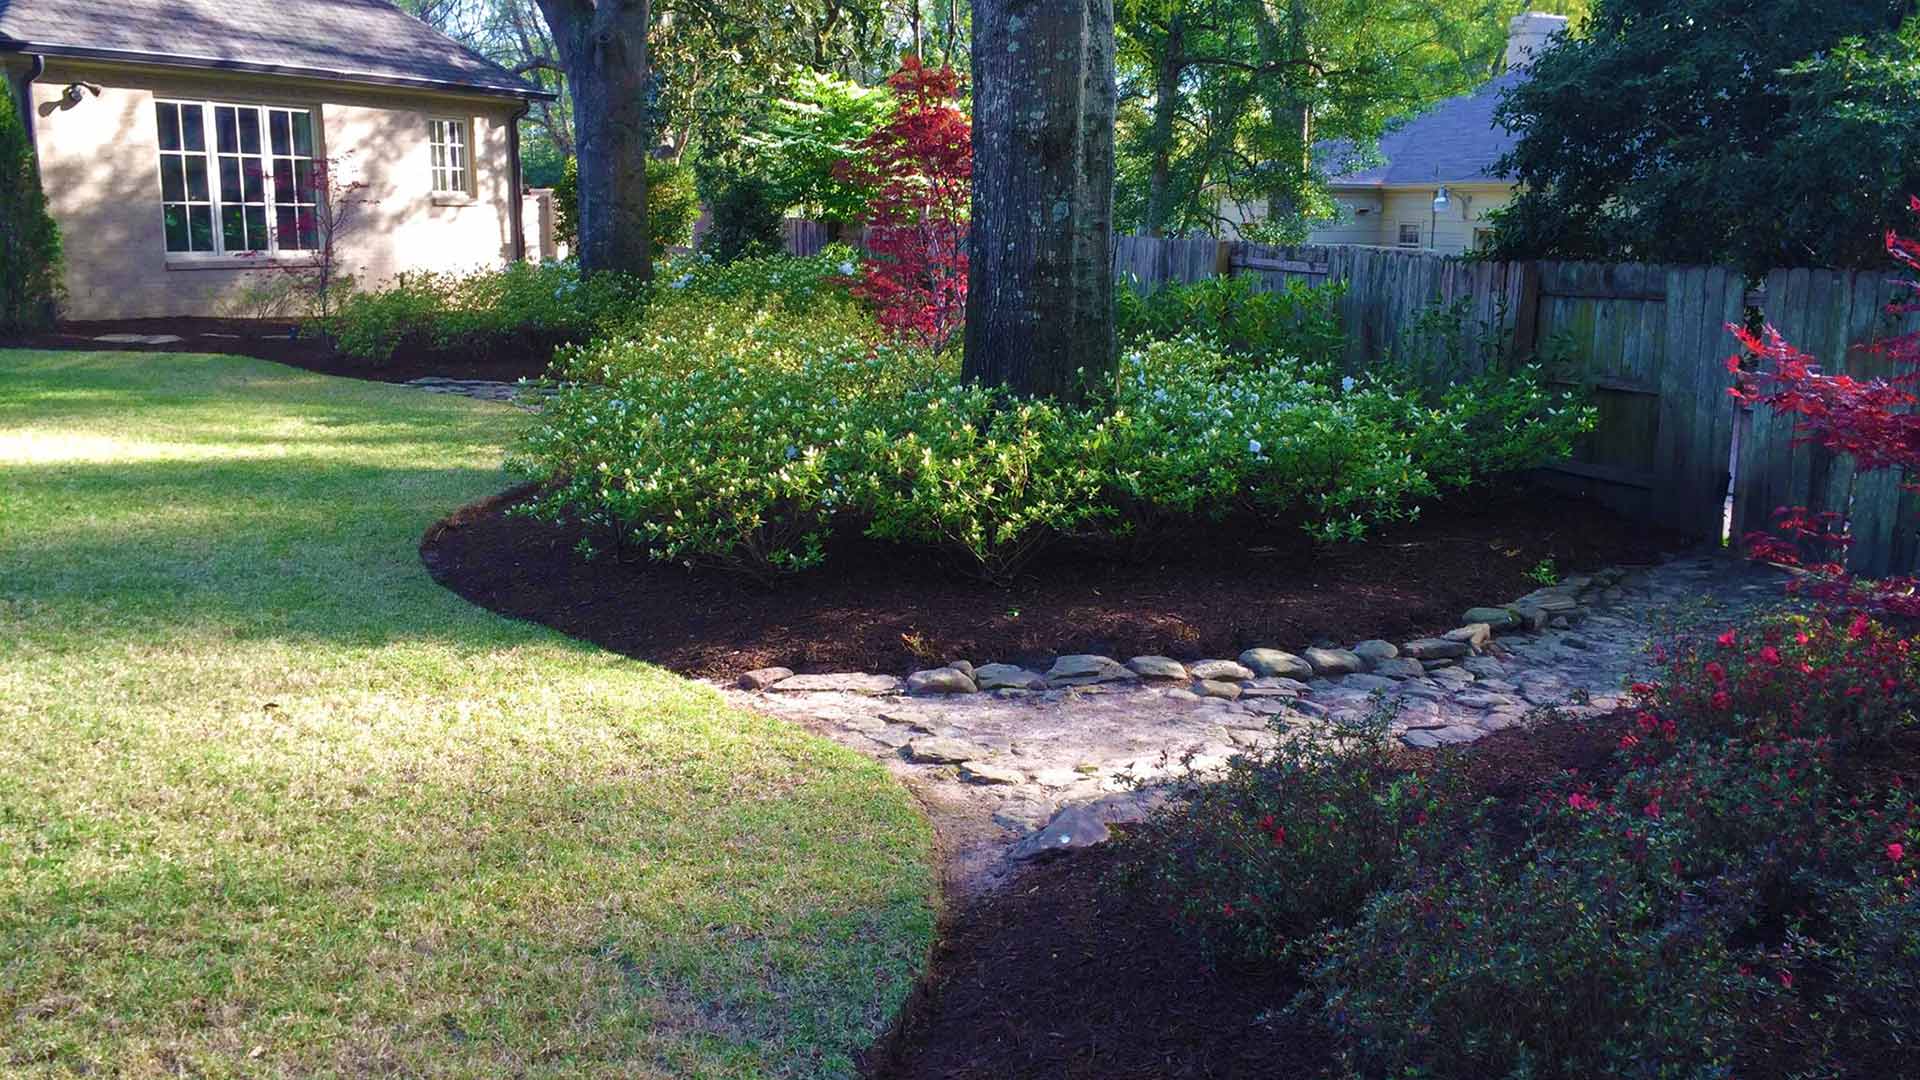 Landscape bed and plantings at a home near Midtown Memphis, TN.